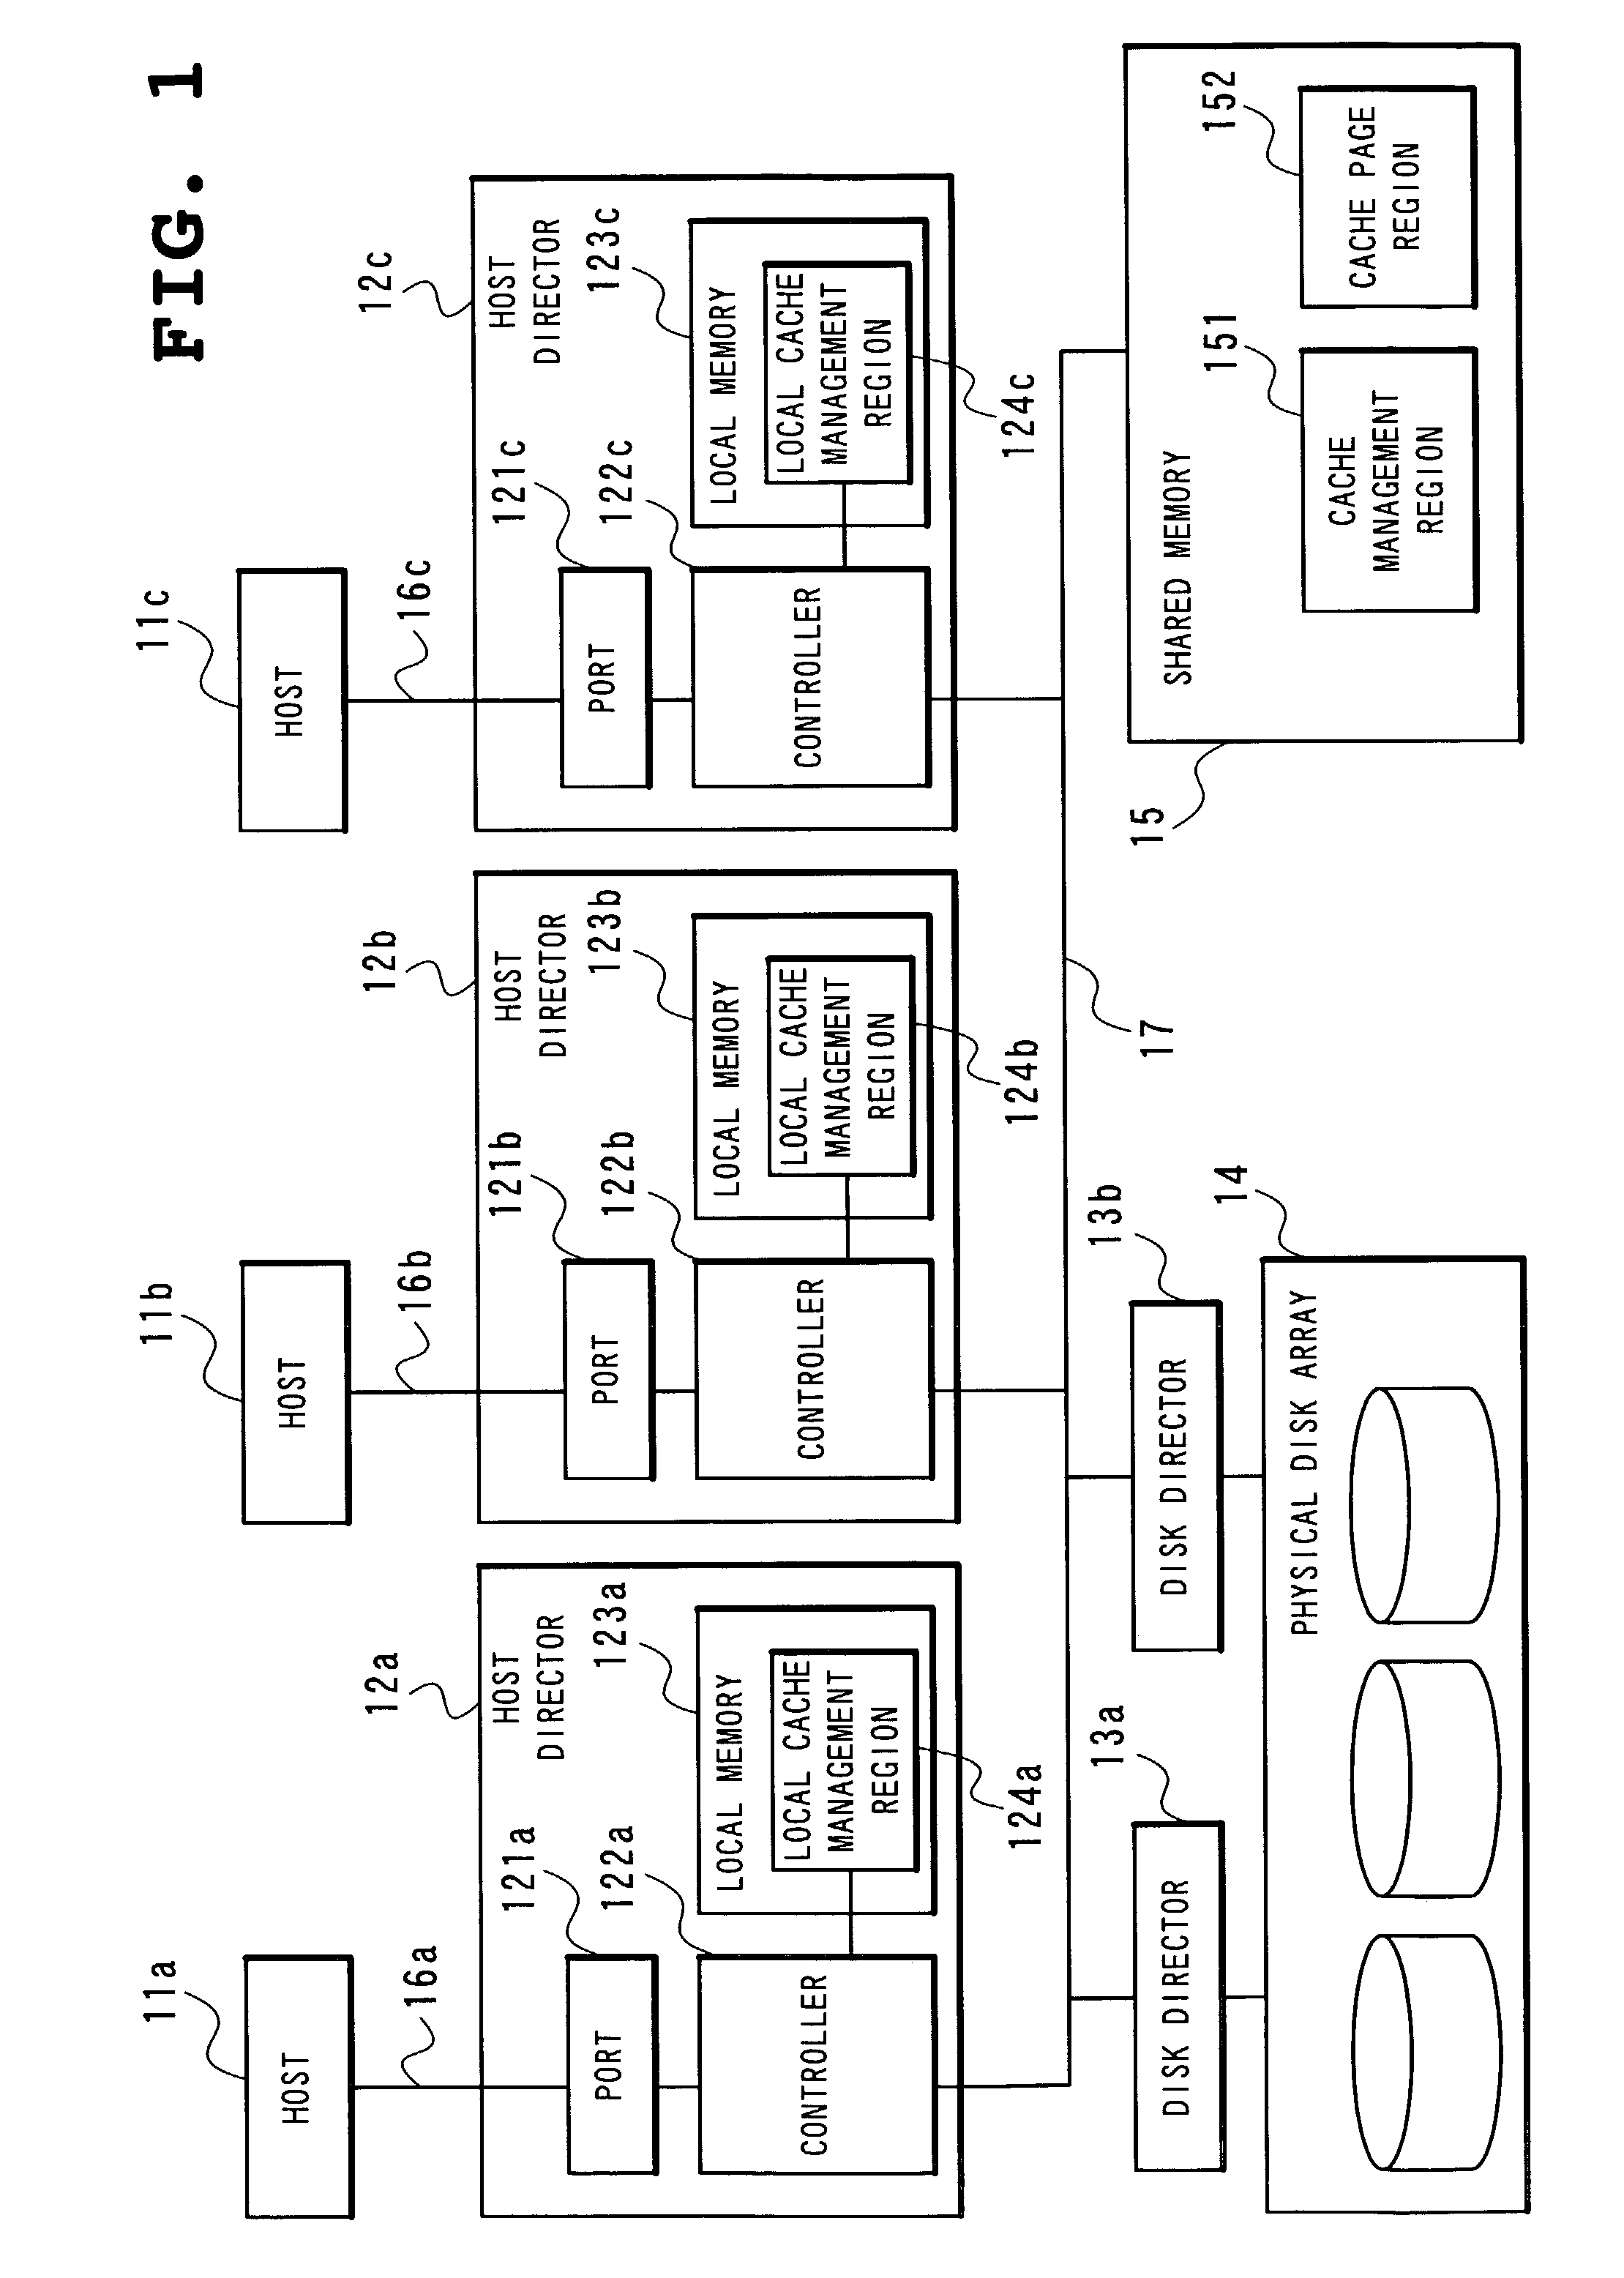 Disk cache management method of disk array device